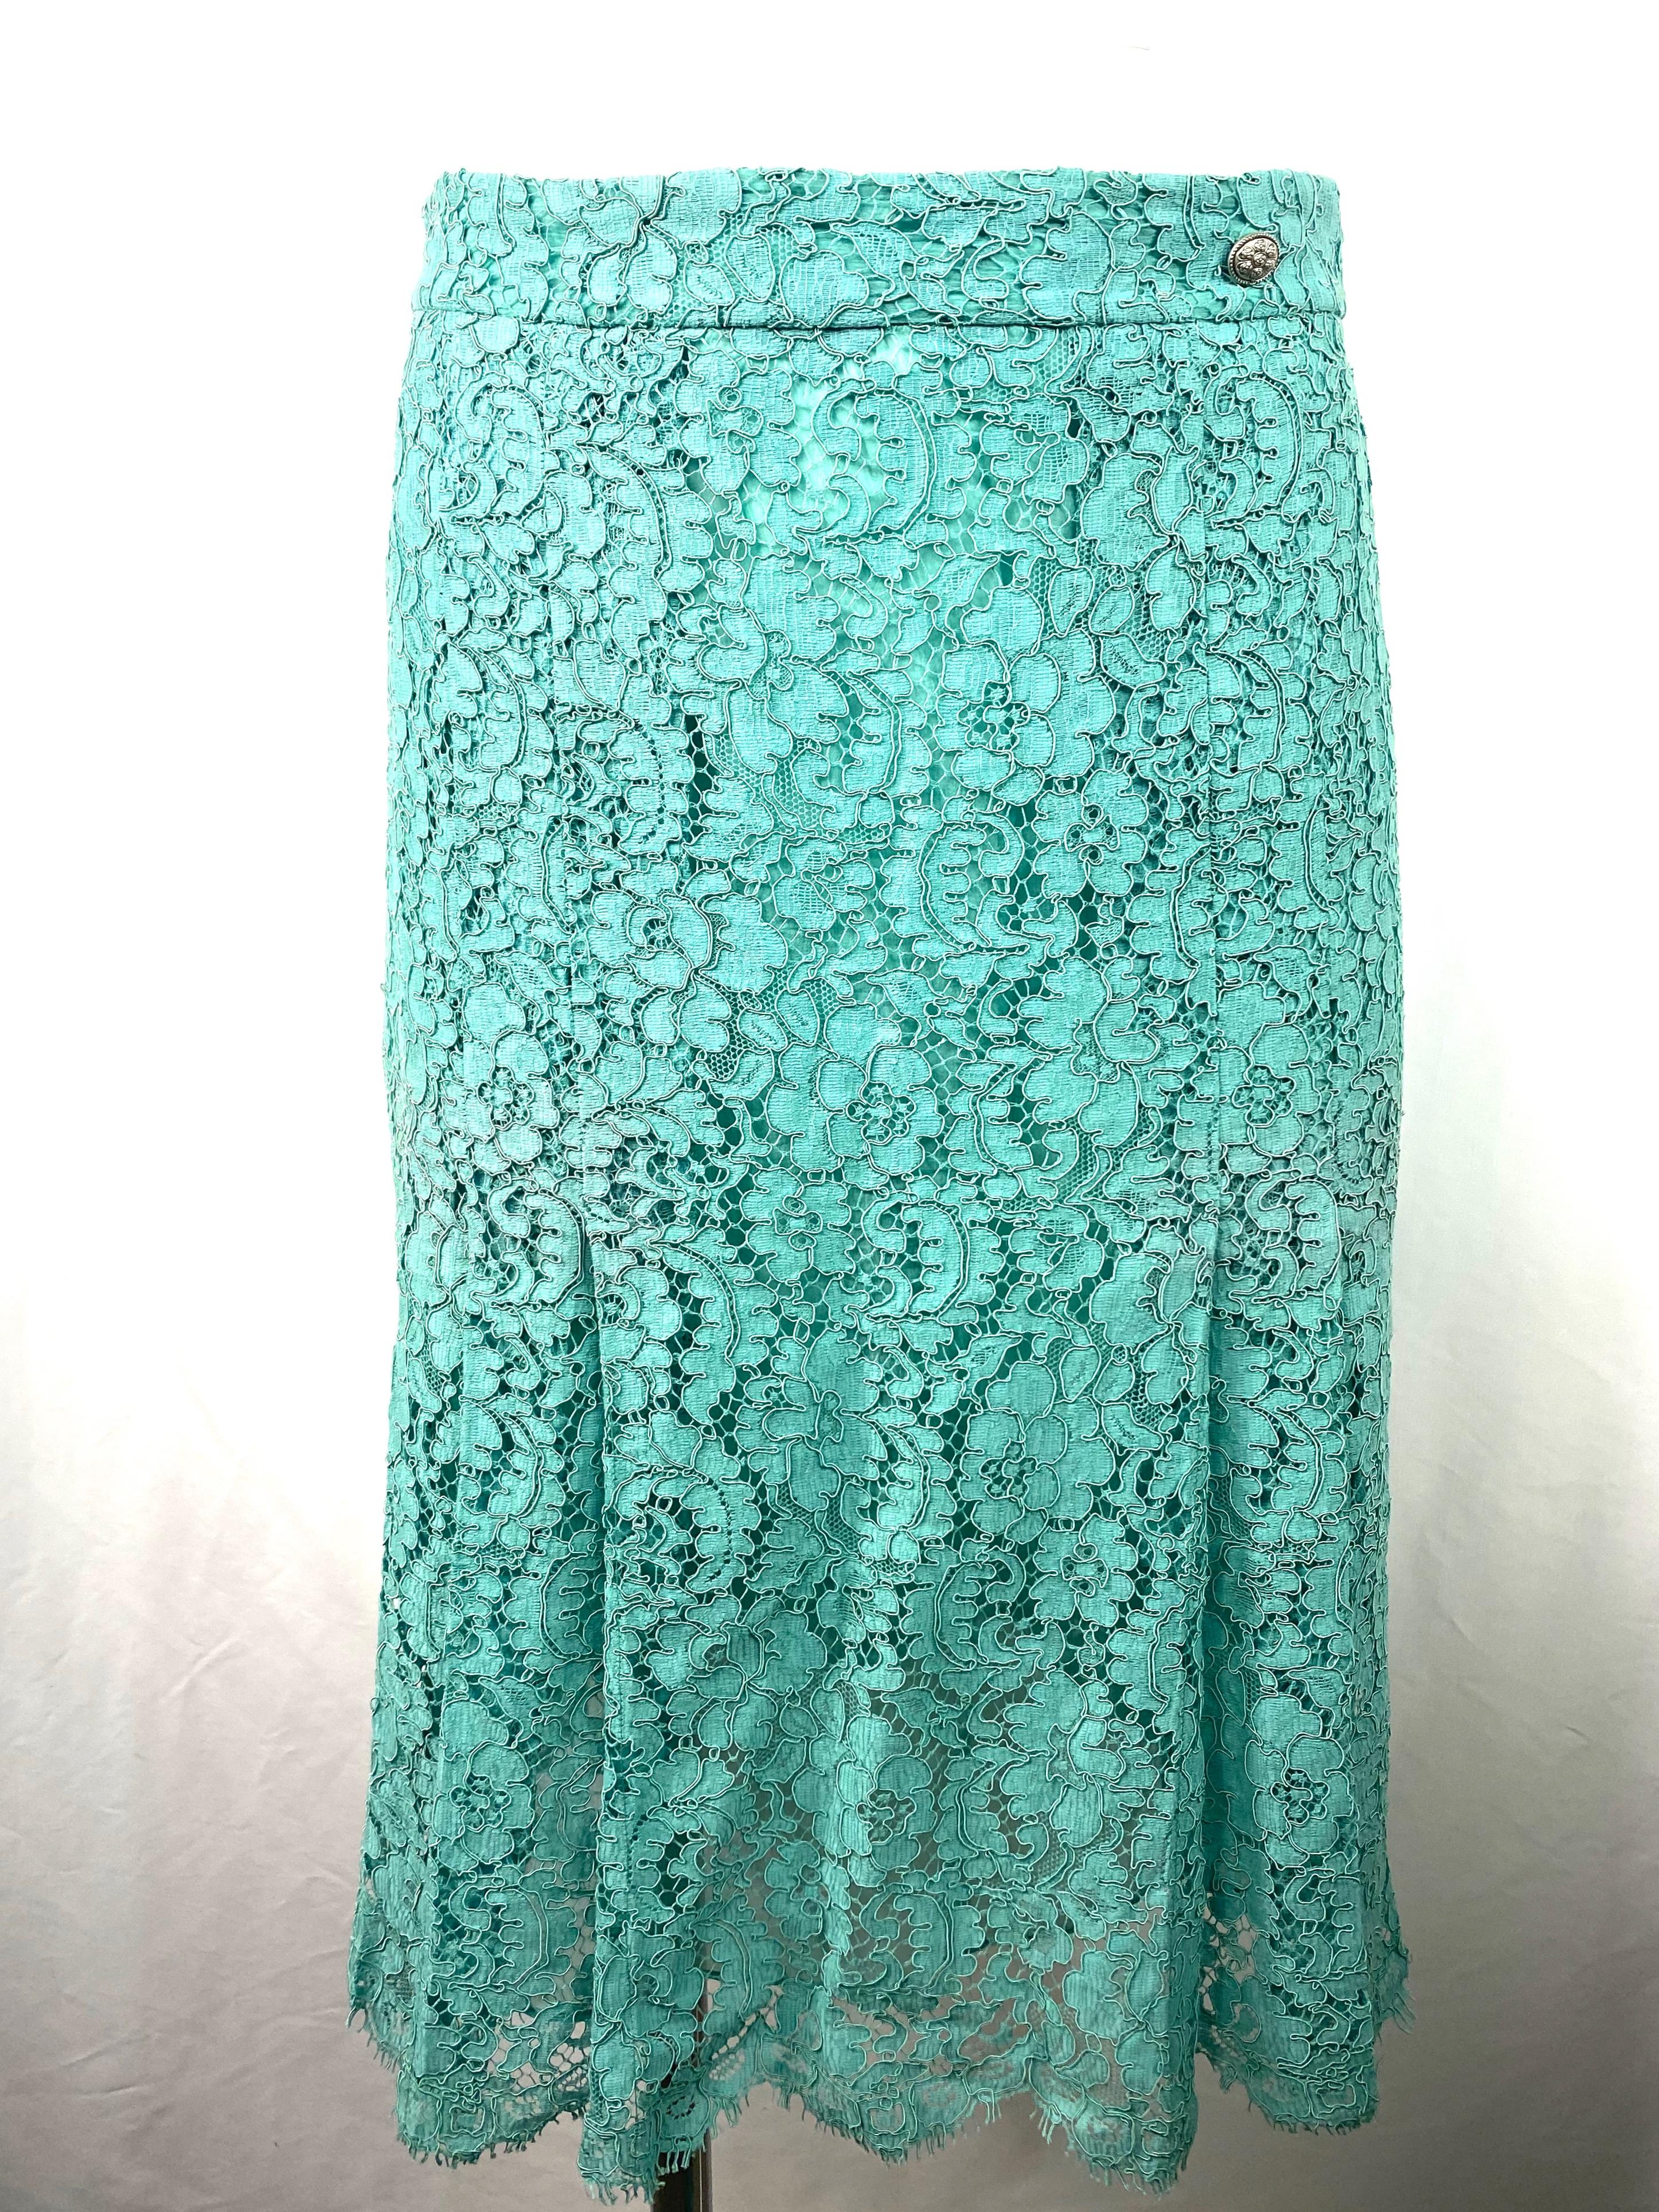 Chanel Turquoise Floral Lace Top and Skirt Set Size 40 For Sale 1